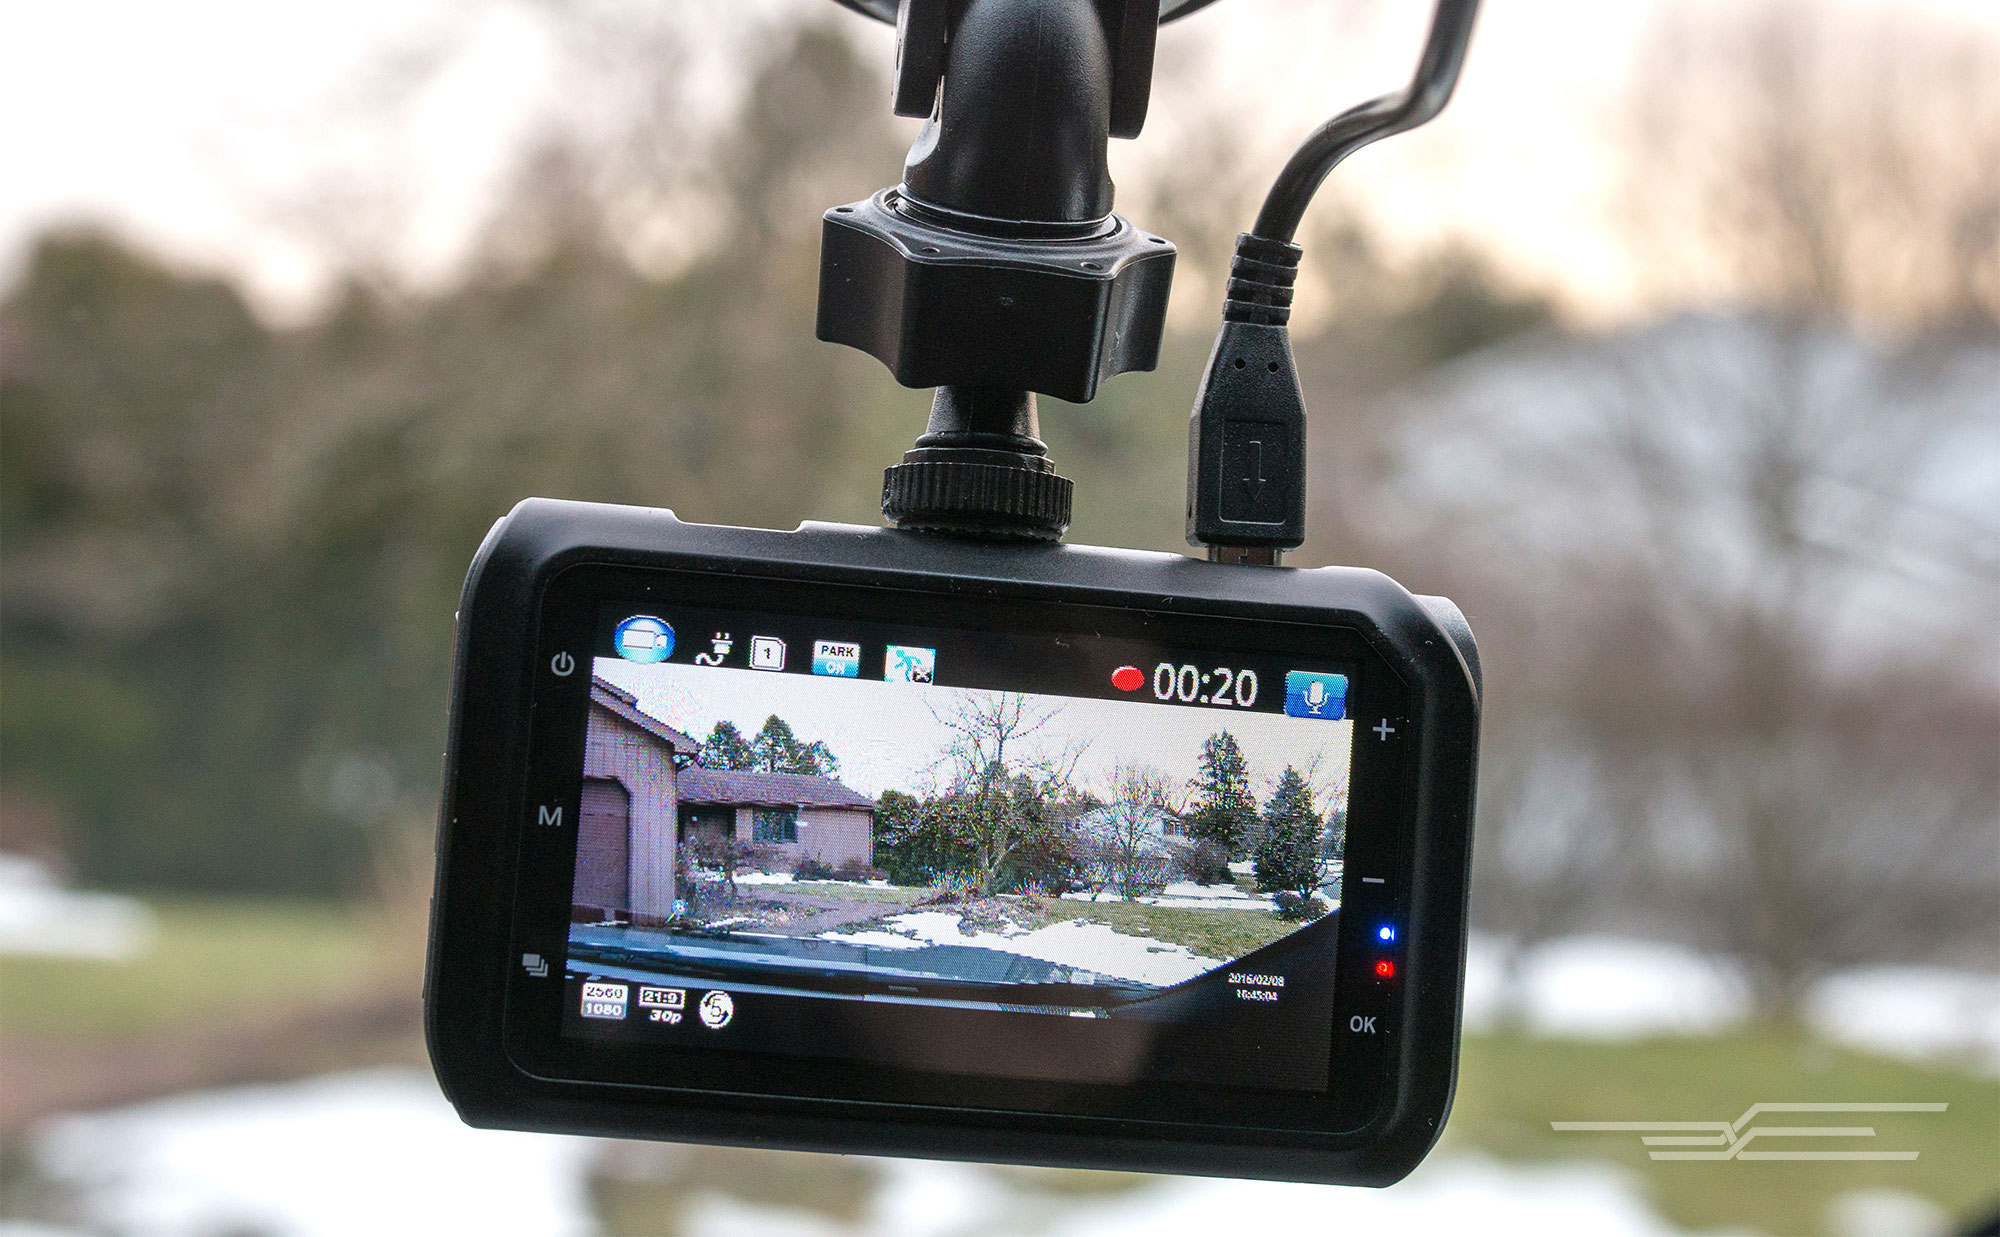 The Dashcam Regulations In Each State - Fleet Management Solutions